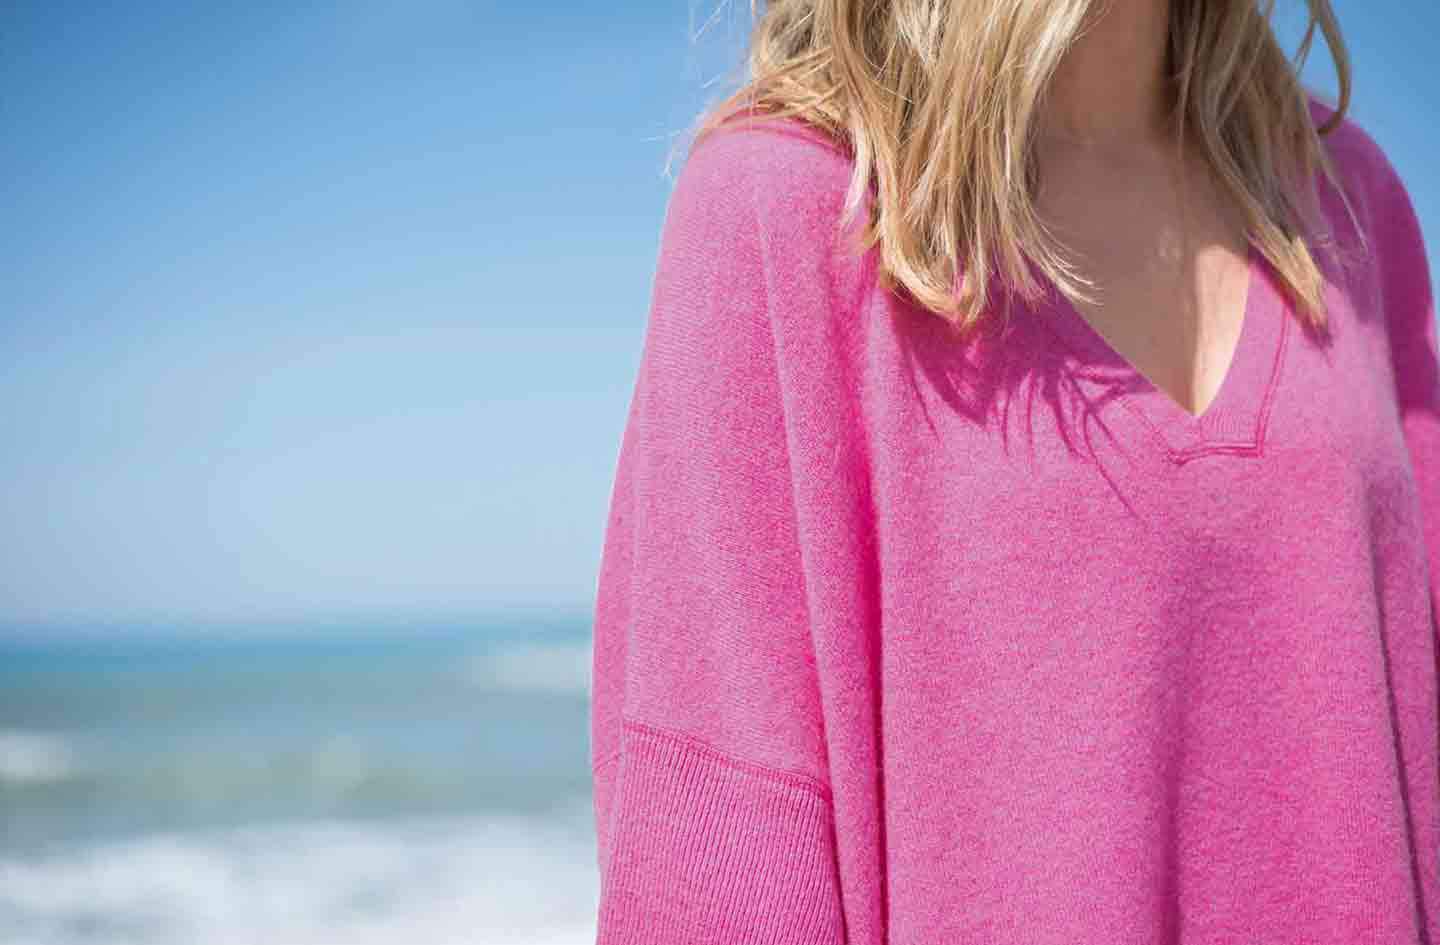 Women-standing-infront-of-the-sea-and-blue-sky-wearing-a-pink-cashmere-kimono-